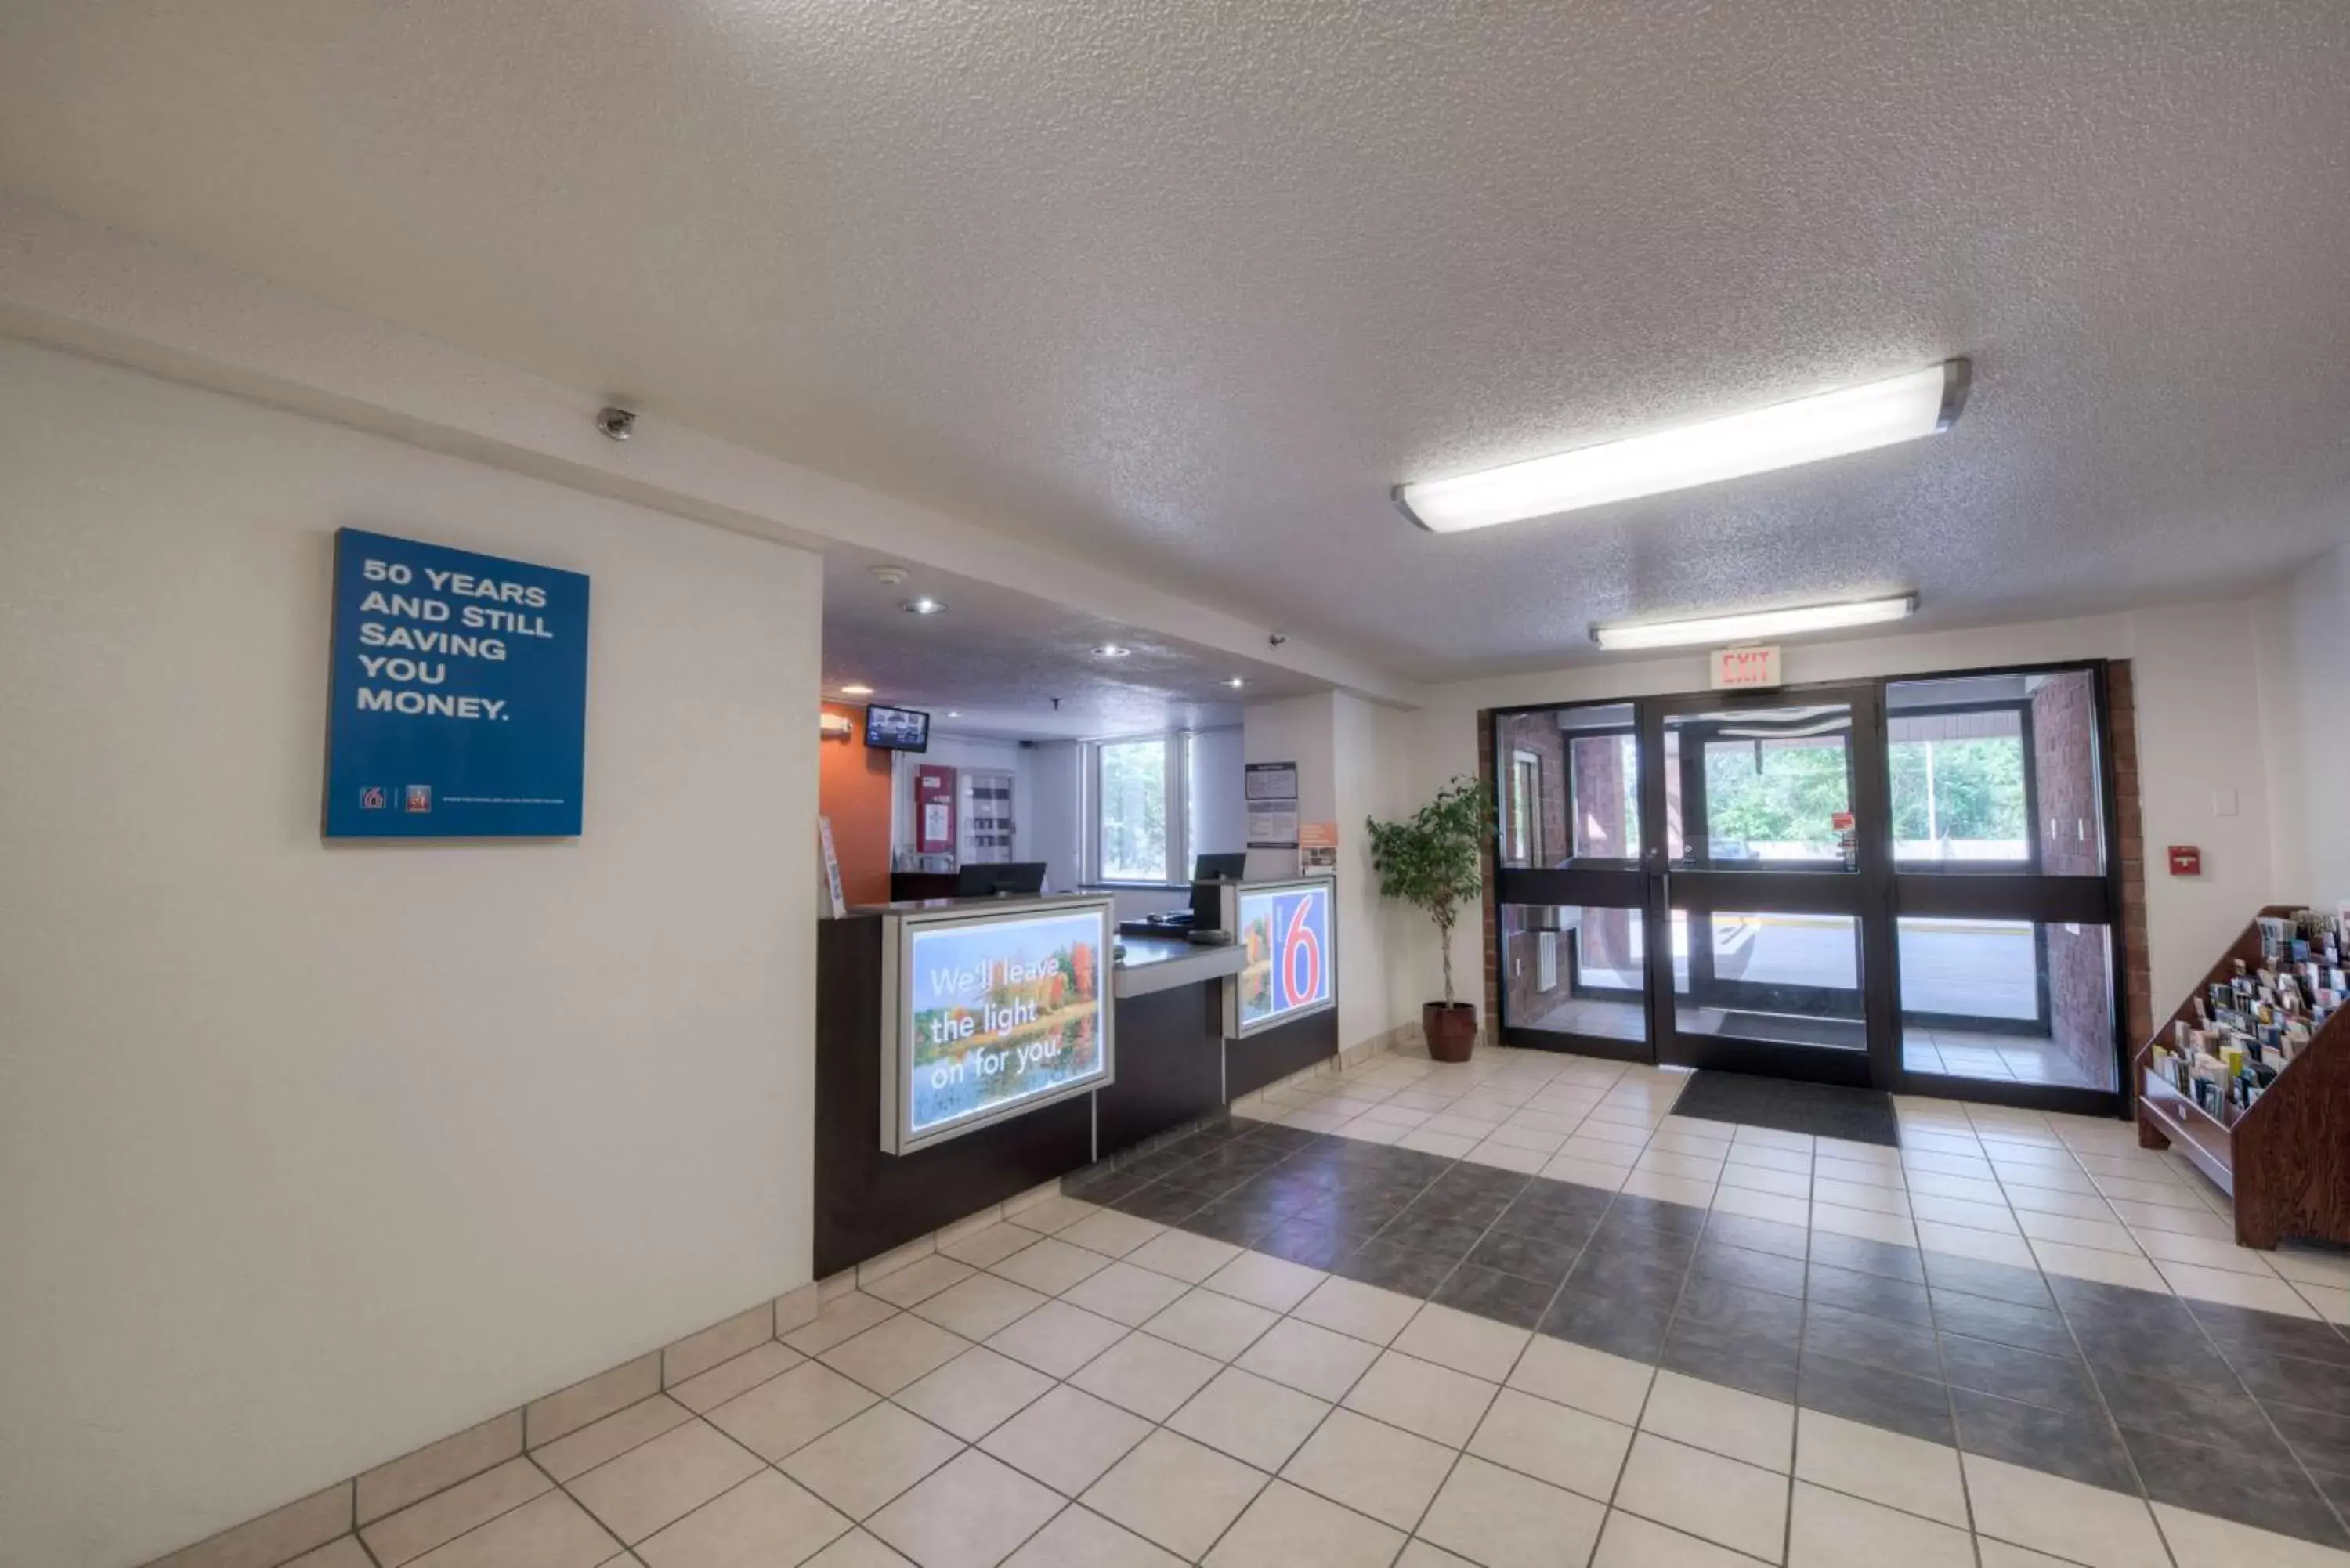 Lobby or reception in Motel 6-Branford, CT - New Haven